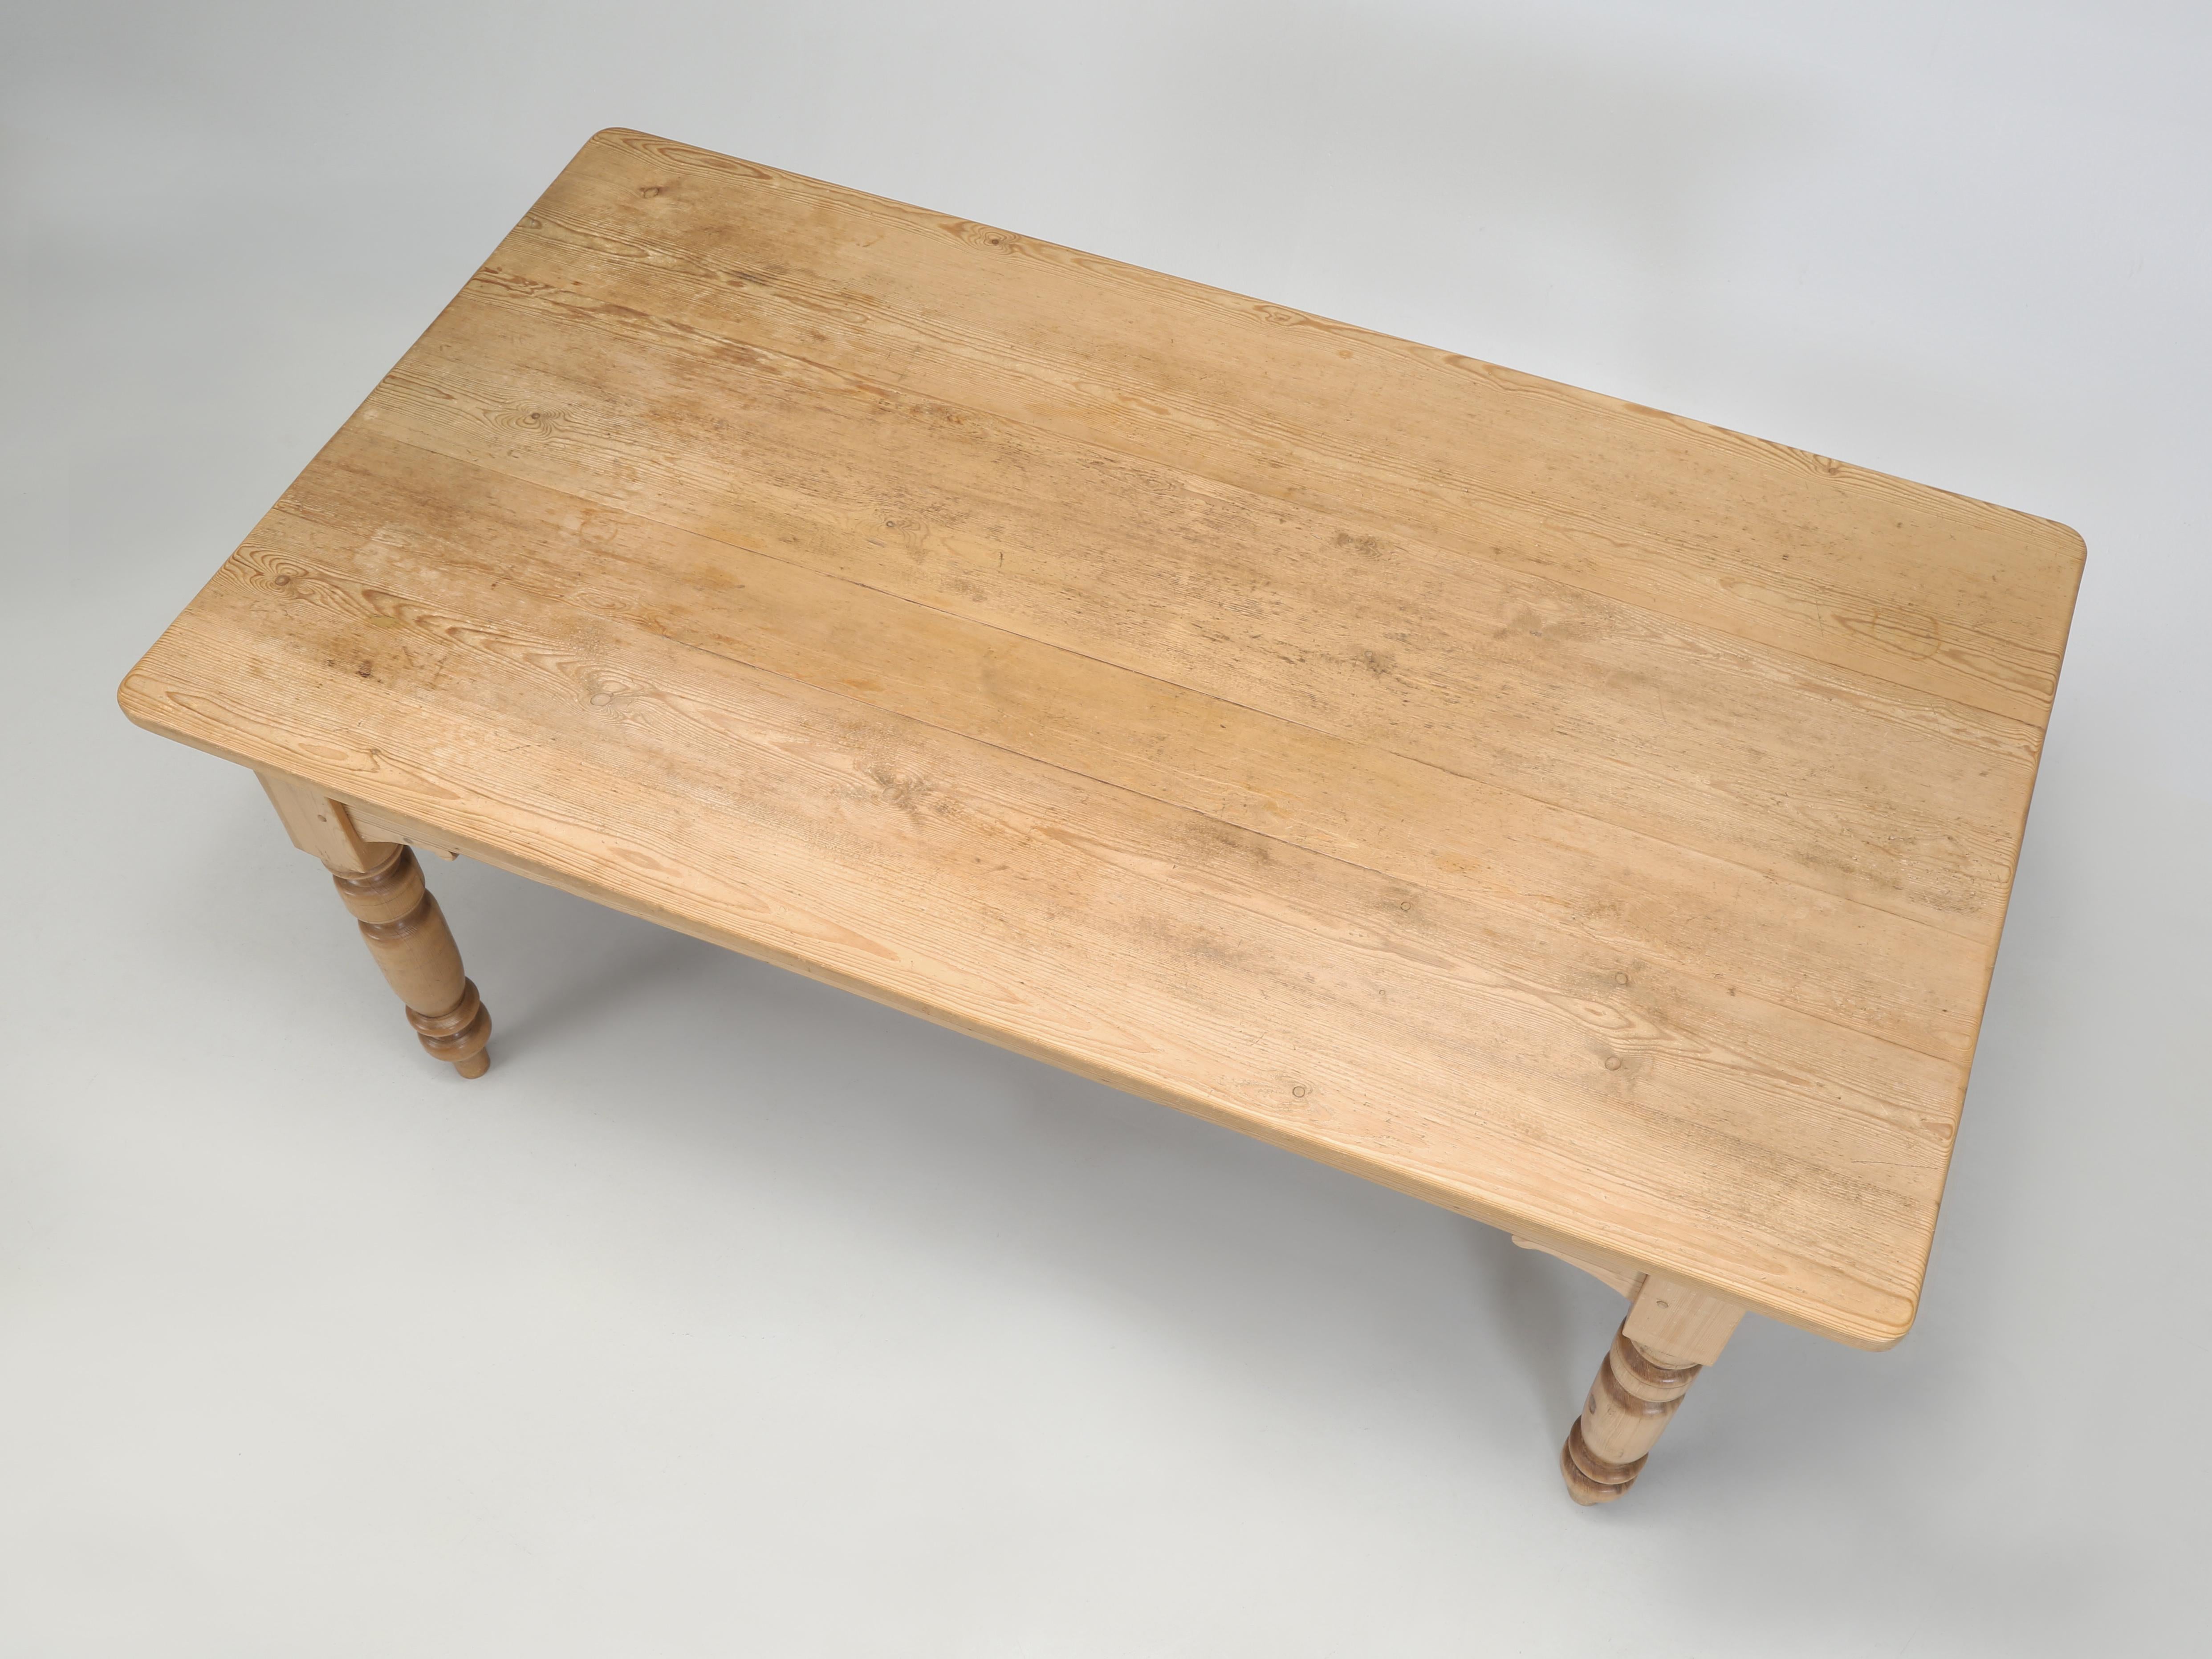 Originally imported by Vintage Pine and sold in Chicago is a beautifully constructed Pine Farm Table or Pine Kitchen Table made from reclaimed Pine lumber. Vintage Pine was  one of Chicago's premier shops for quality English Pine furniture years ago